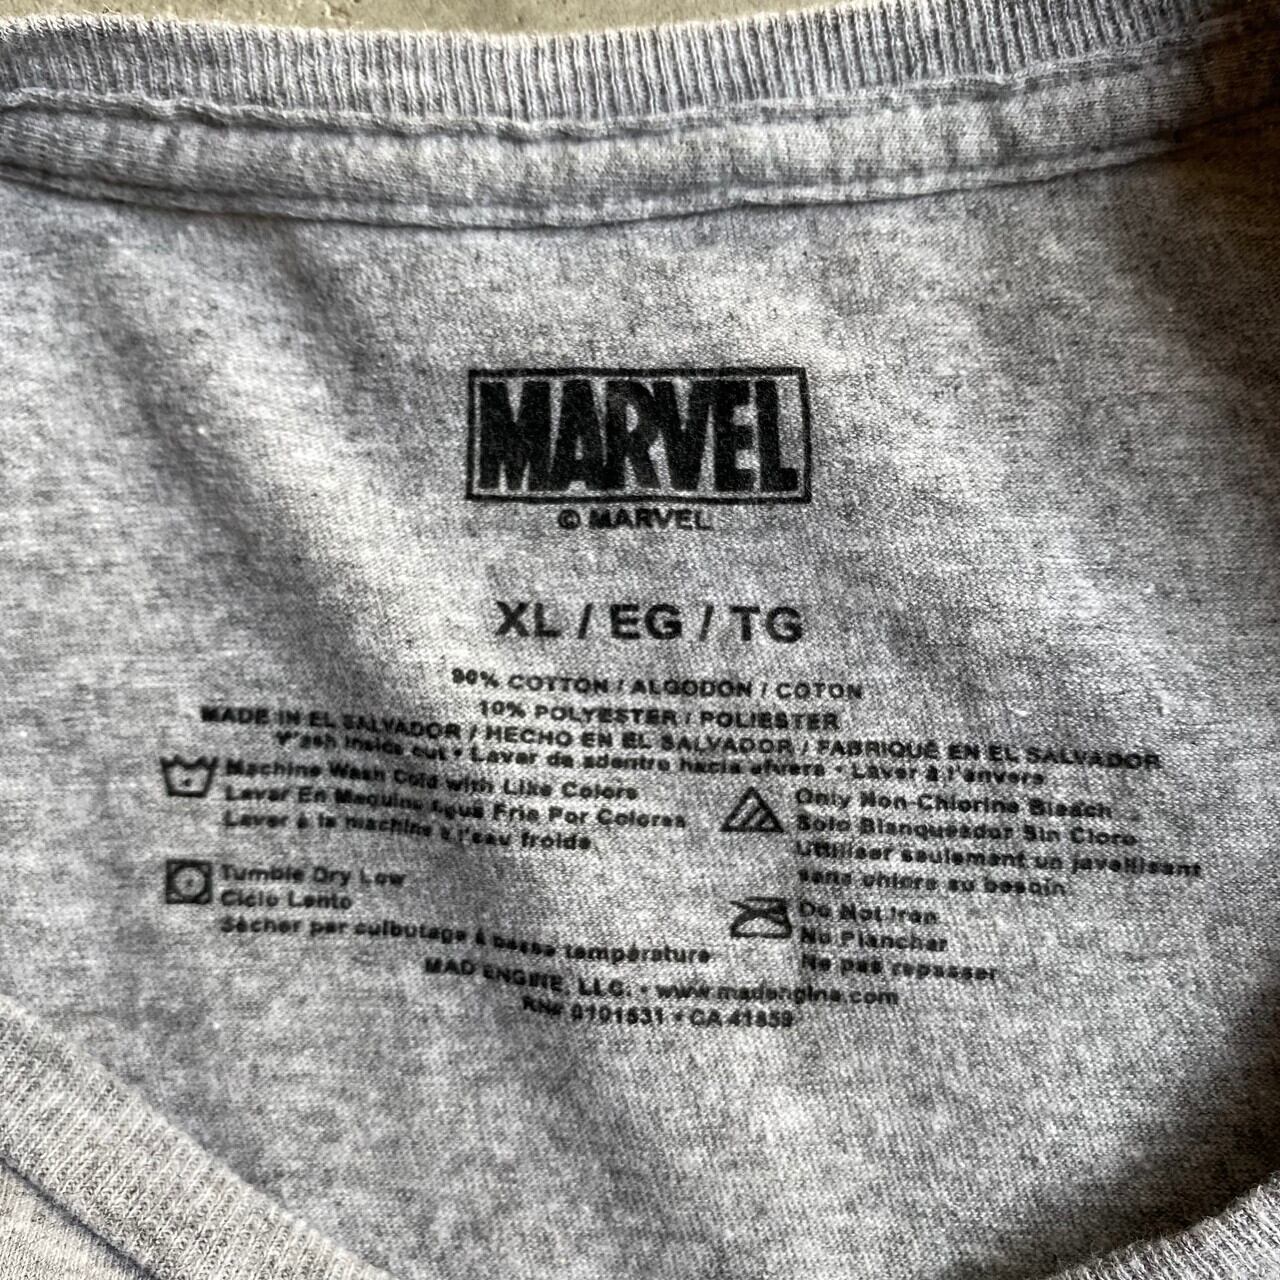 MARVEL コミック アメコミ キャラクタープリントTシャツ メンズXL 古着 グレー スーパーヒーロー映画 アメリカ【Tシャツ】【P2000】 |  cave 古着屋【公式】古着通販サイト powered by BASE